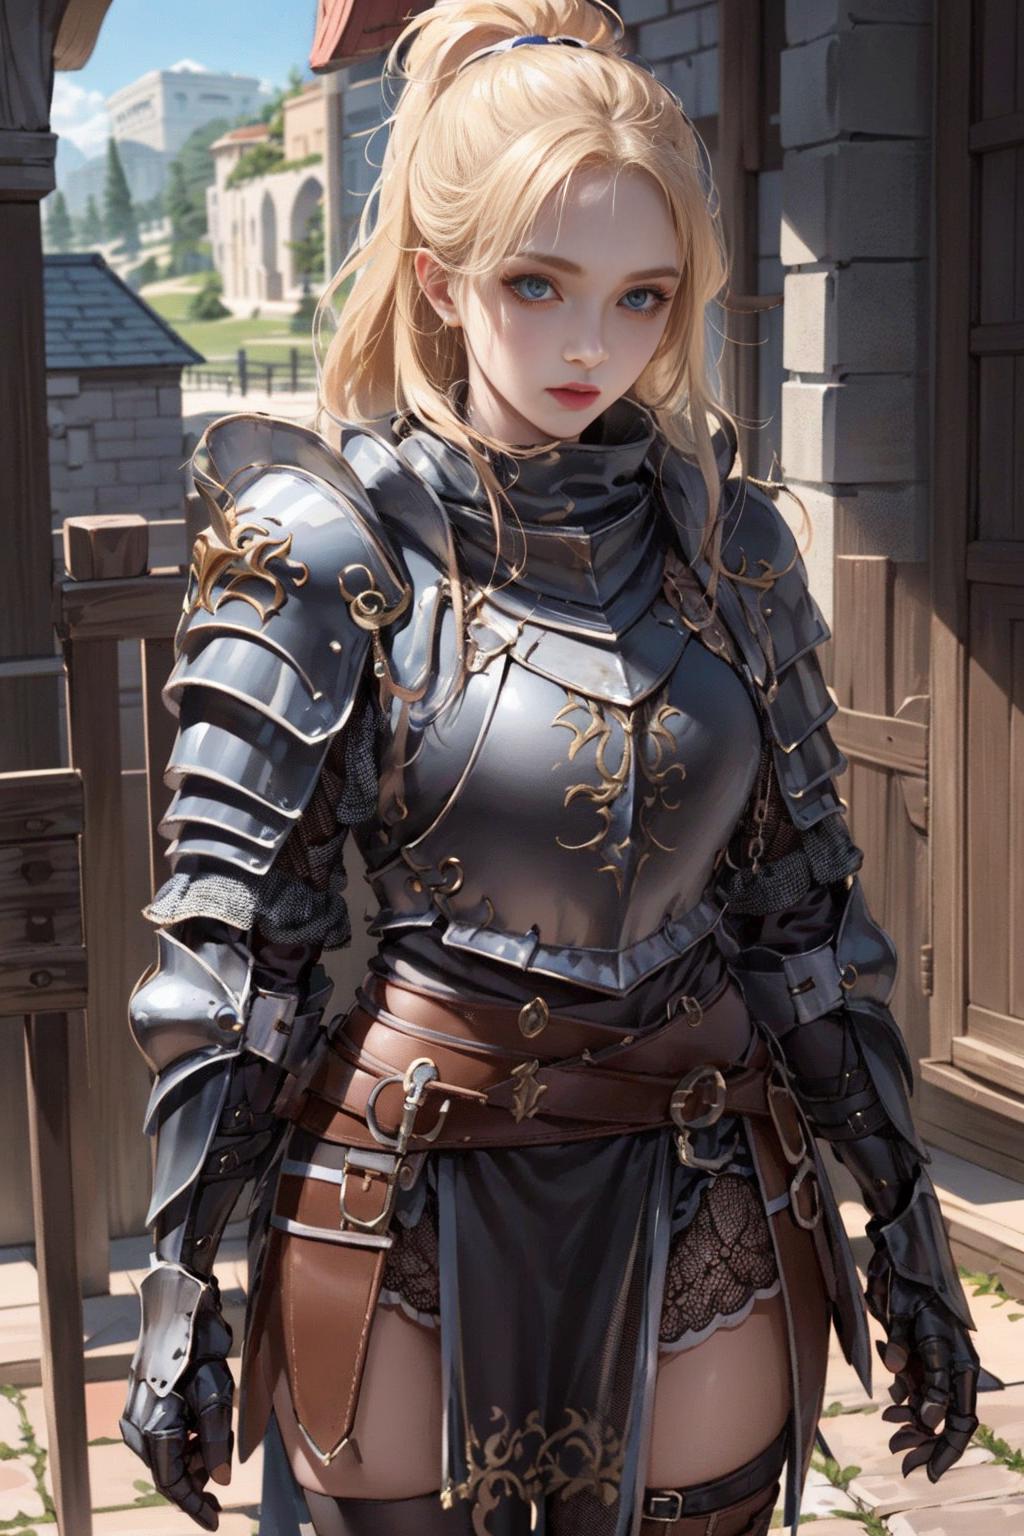 A fantasy warrior with blonde hair and blue eyes wearing a medieval armor and standing near a wooden fence.